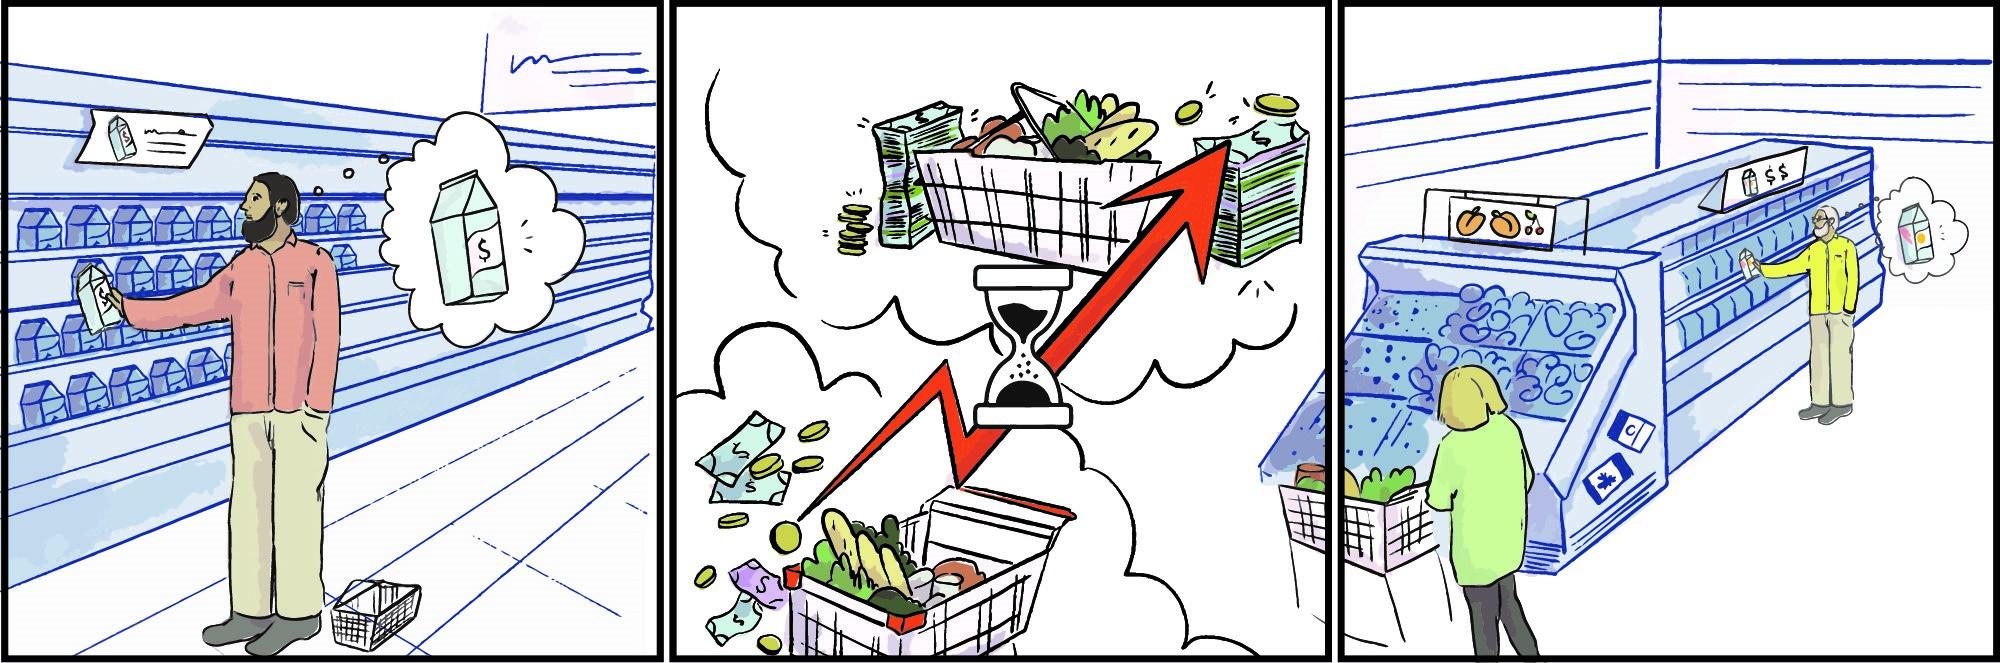 Cartoon, 3 panels, a supermarket in the 60s, a diagram illustrating rising grocery prices, a modern supermarket with fruits from different countries.